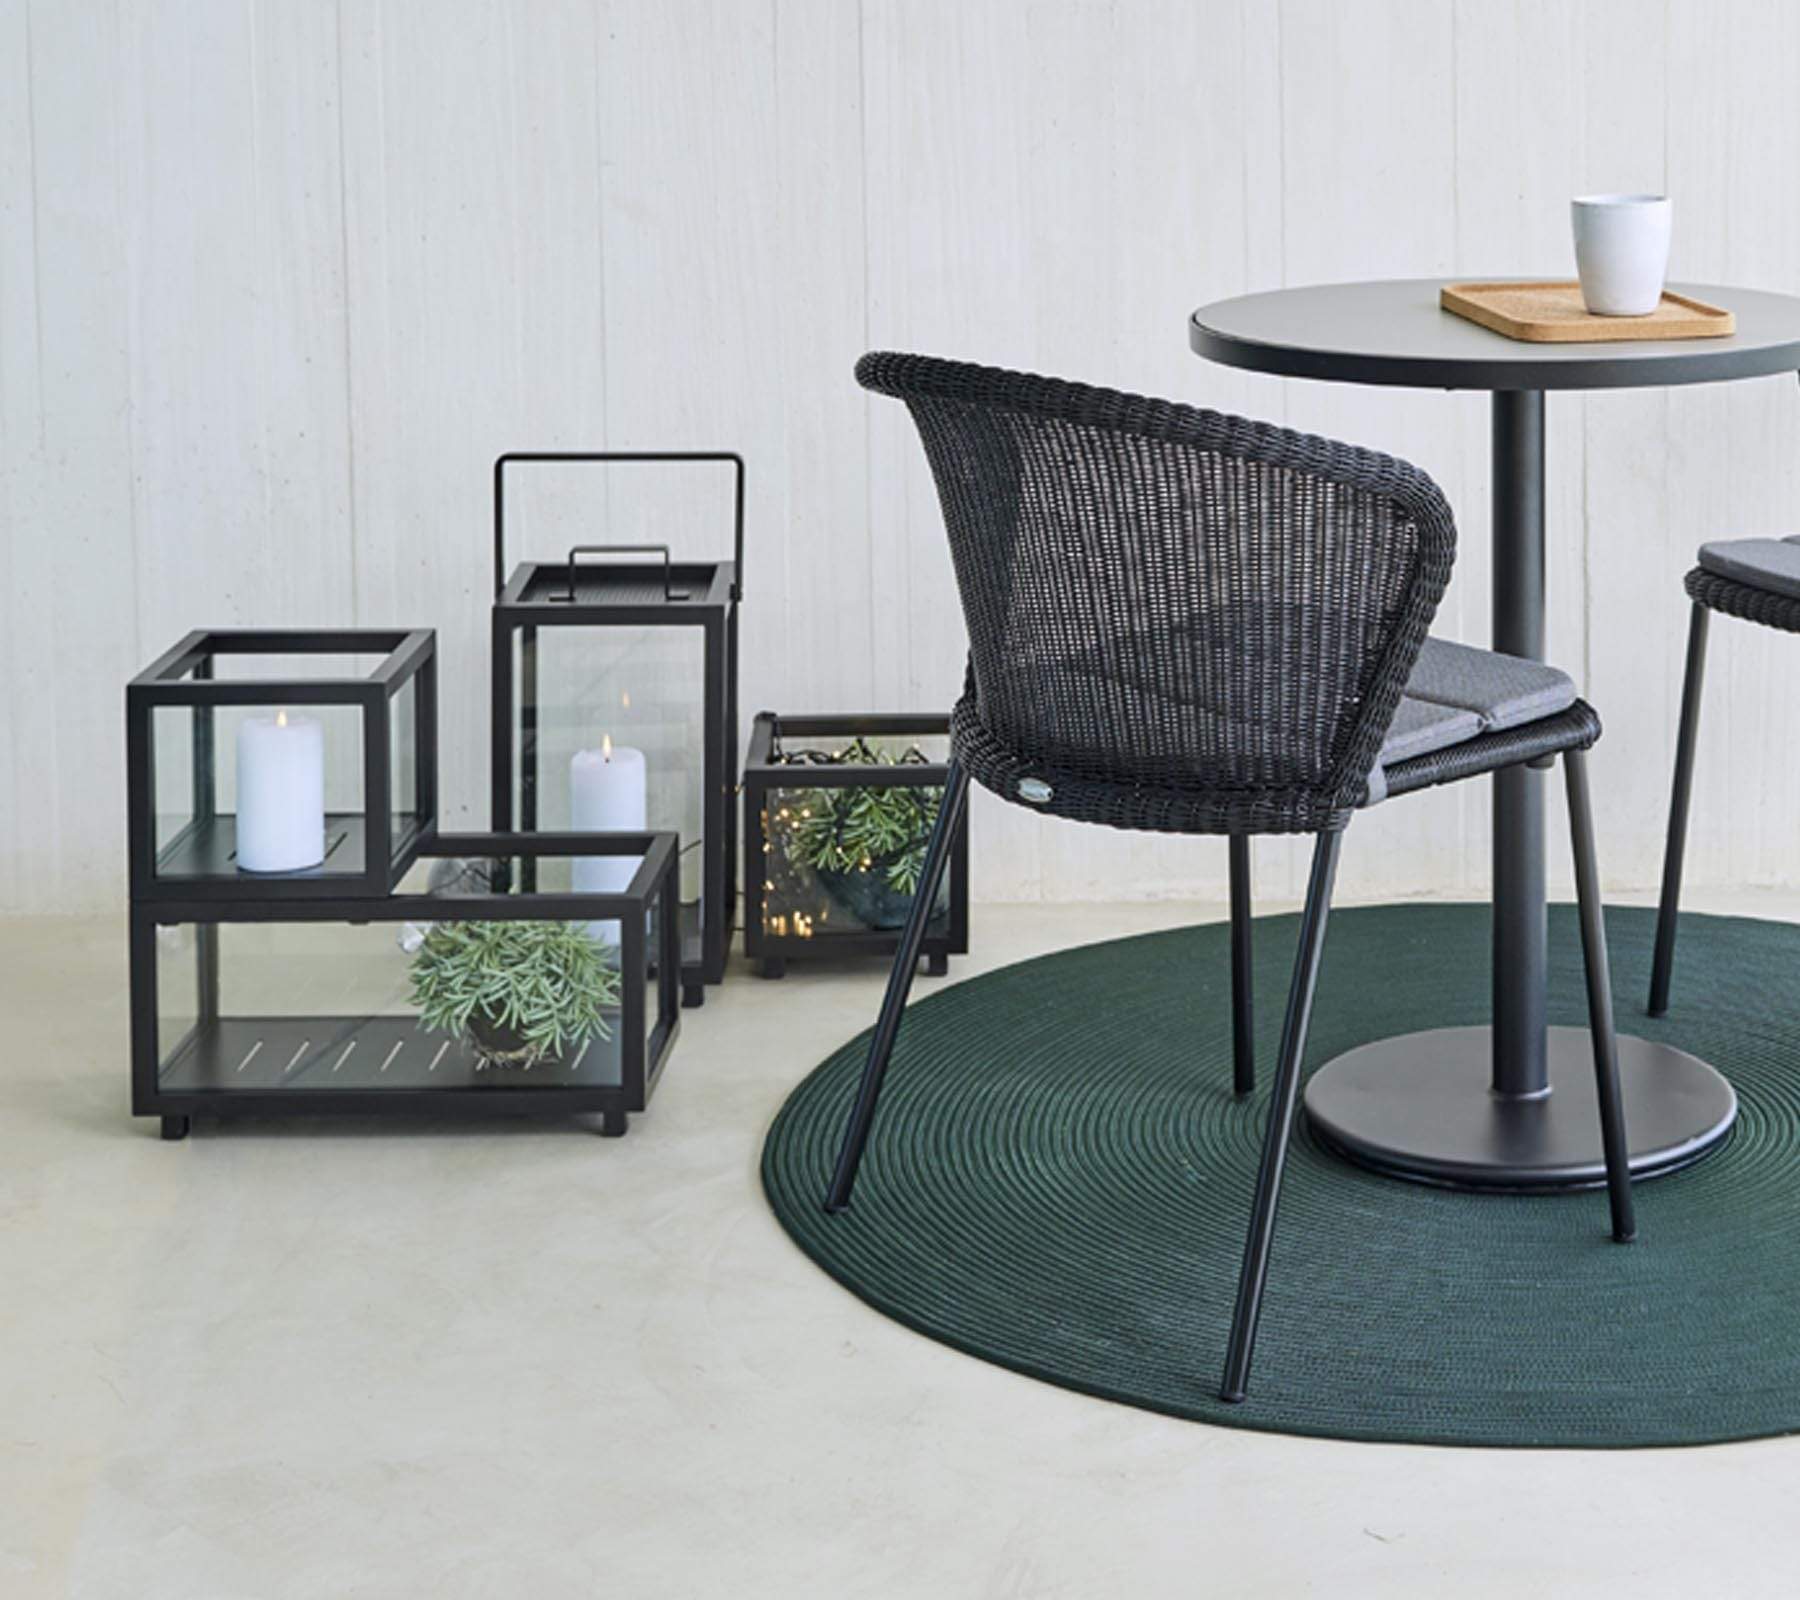 Boxhill's lava grey outdoor rectanglular light box with plants on it beside black outdoor dining chair and grey round table